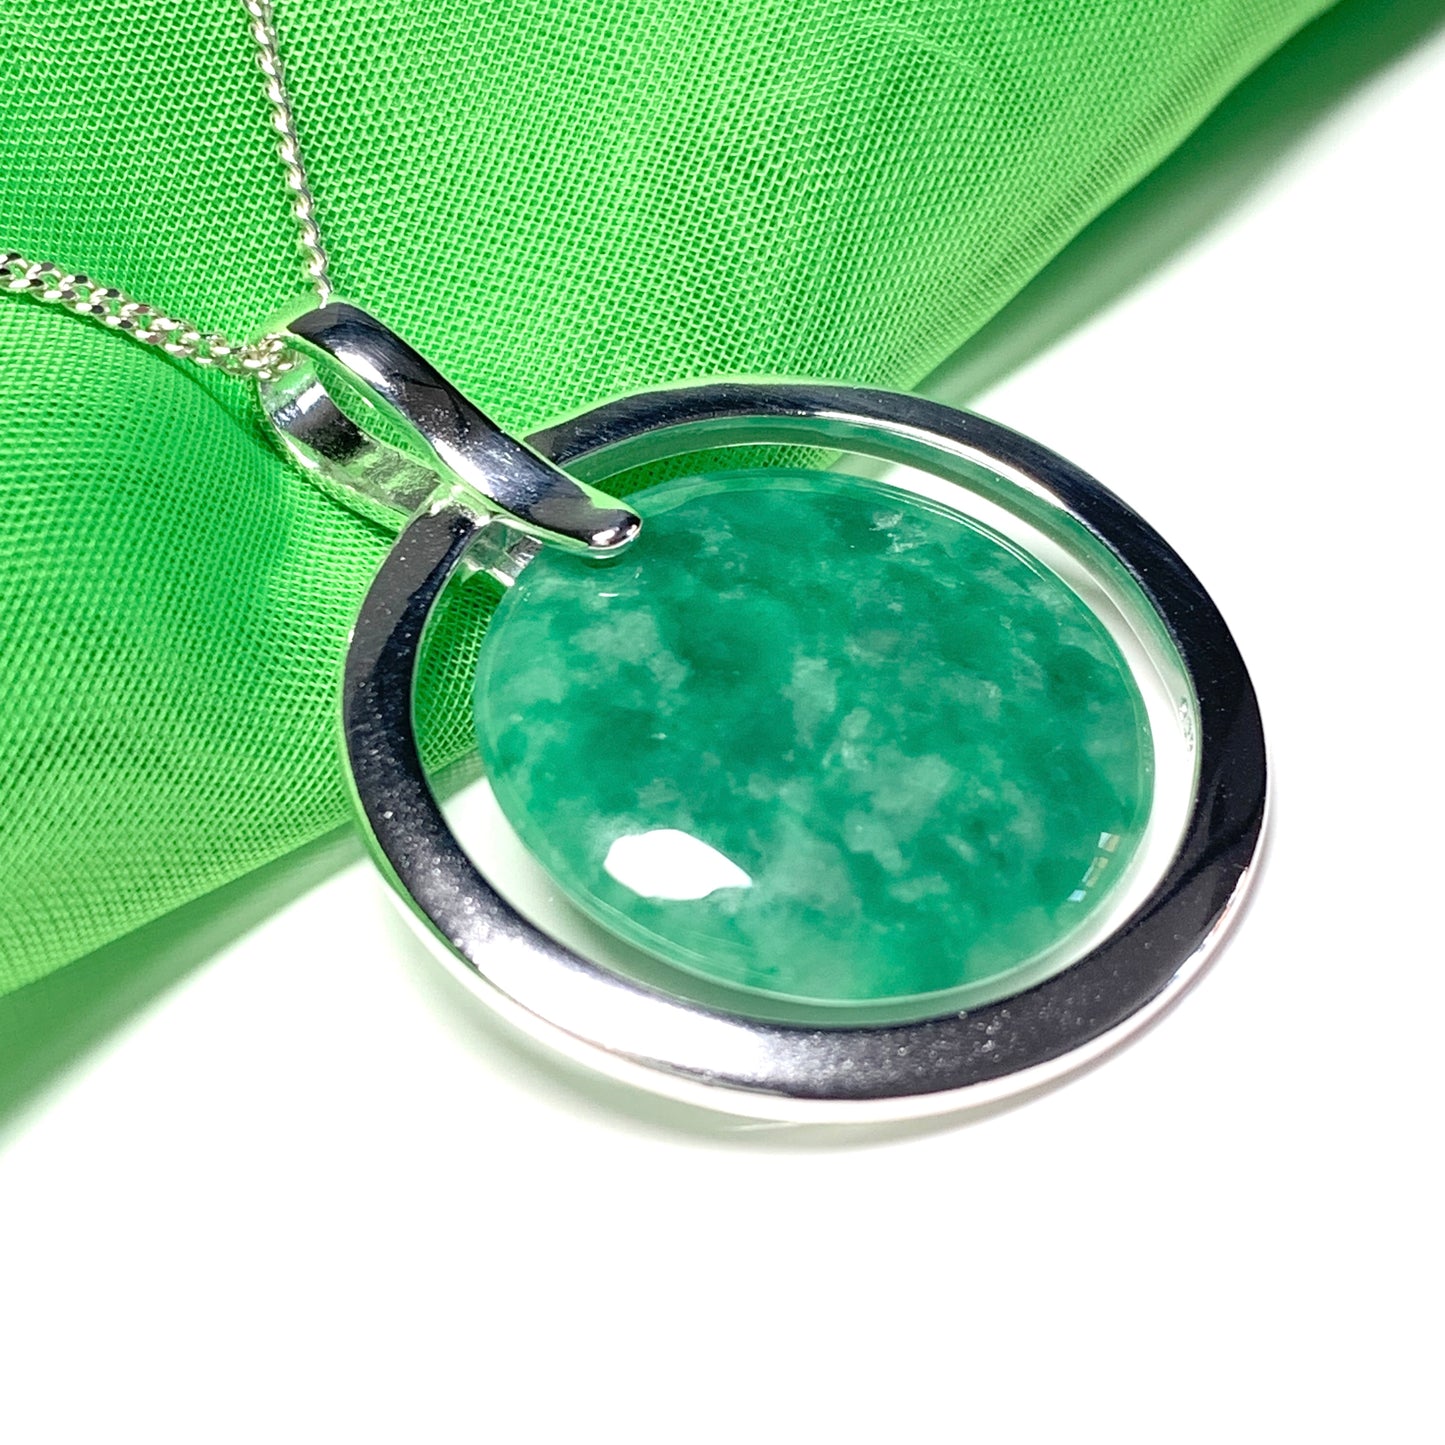 Large silver round shaped dark green real jade necklace